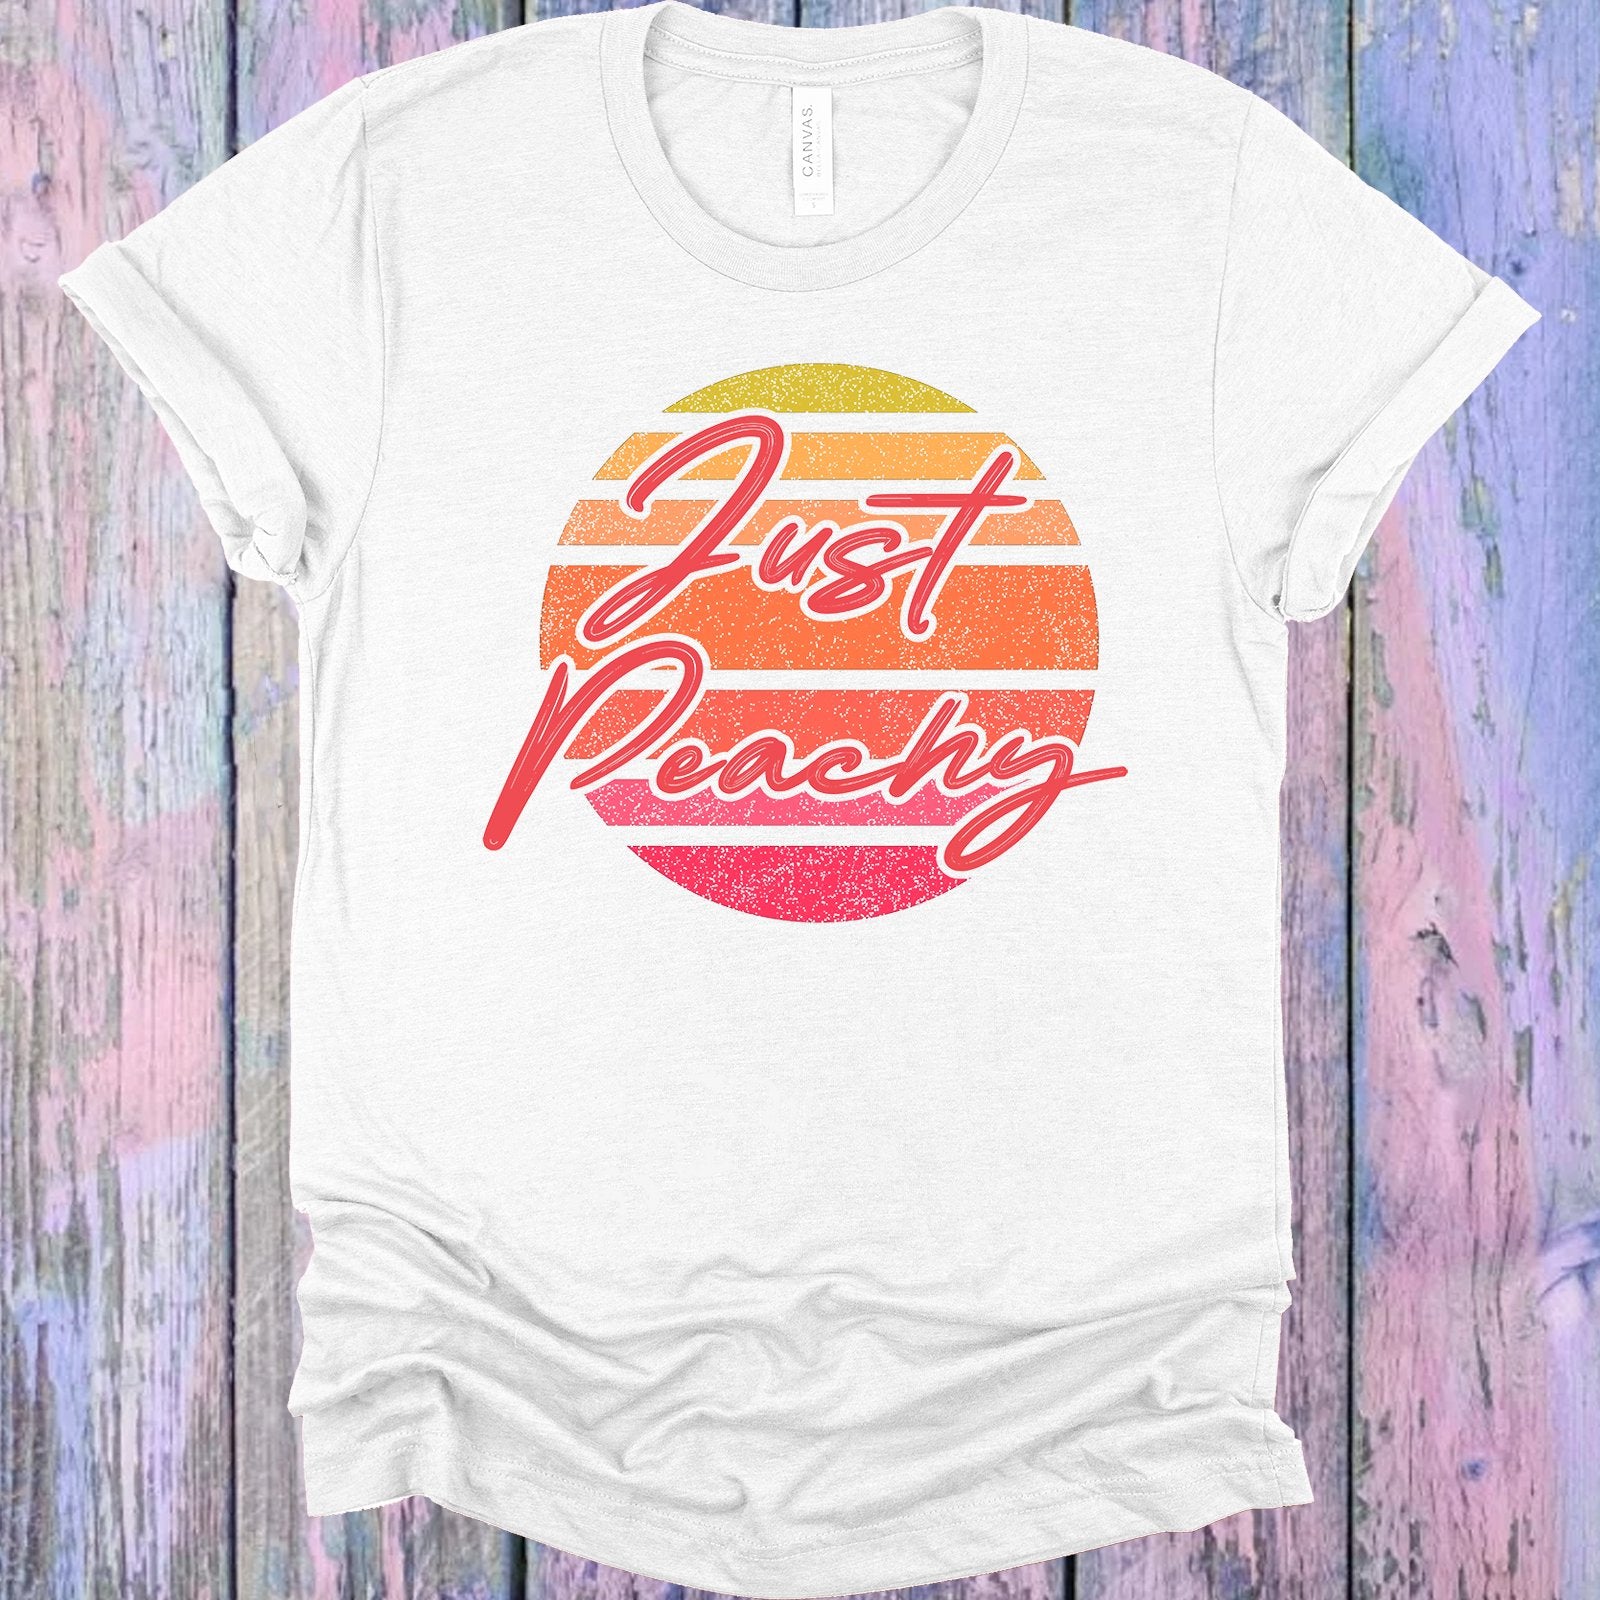 Just Peachy Graphic Tee Graphic Tee